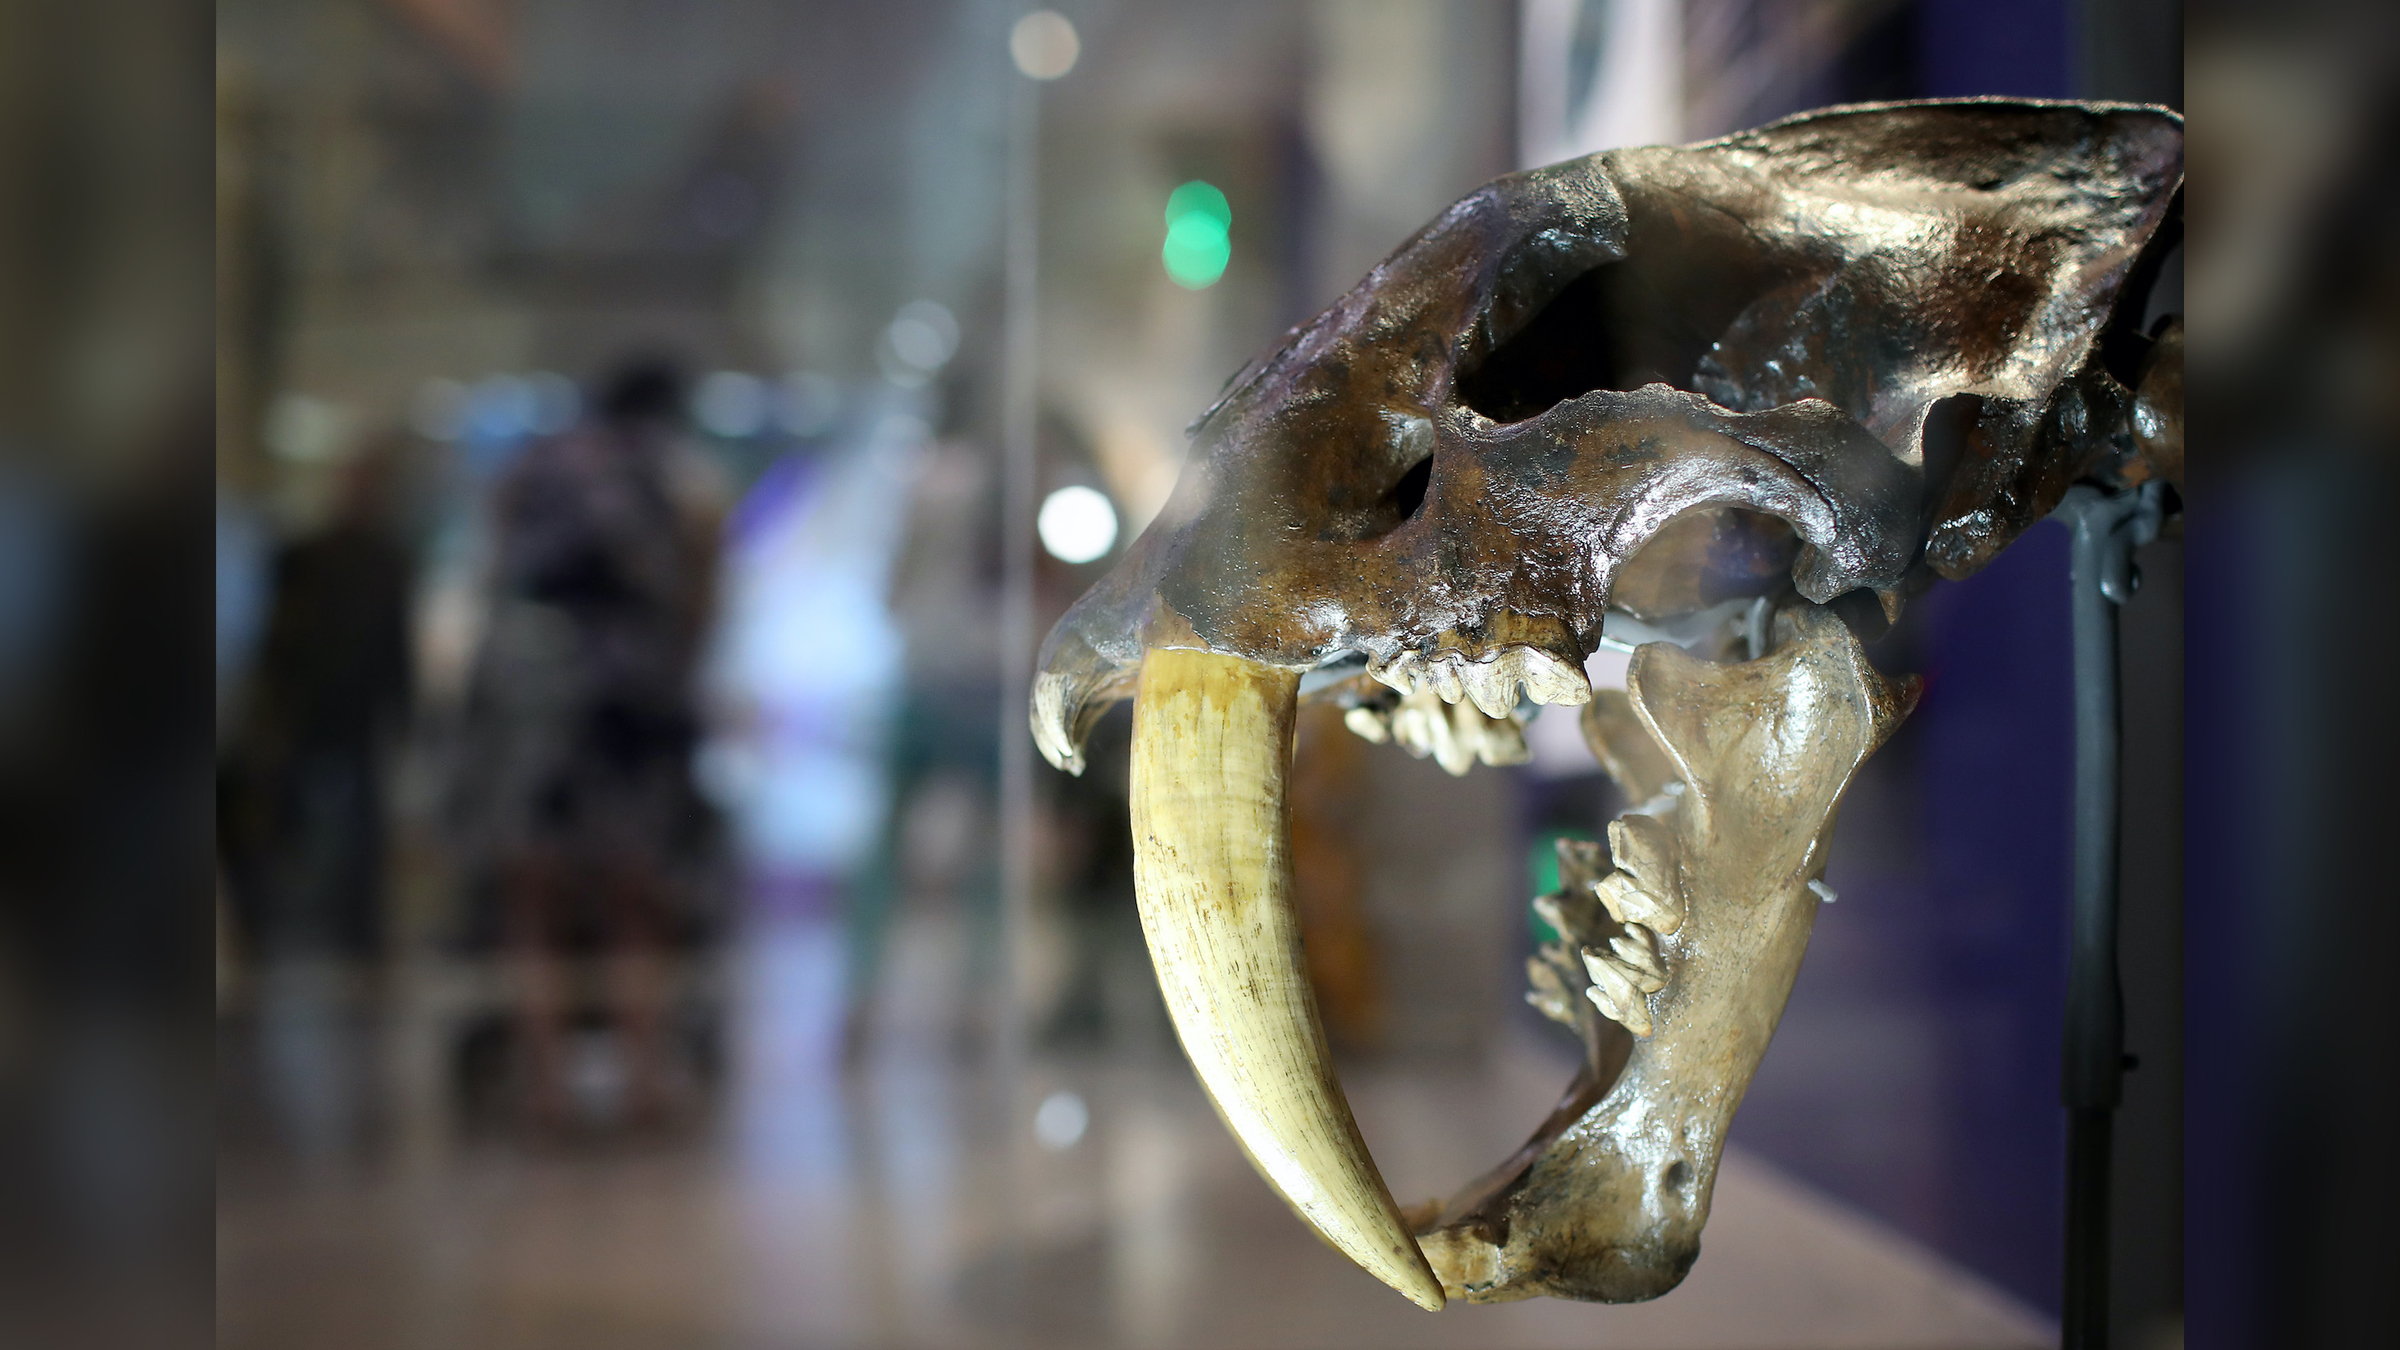 The skull of the famous saber-toothed cat (Smilodon Fatis) on display at the Smithsonian National Museum of Natural History in Washington, DC